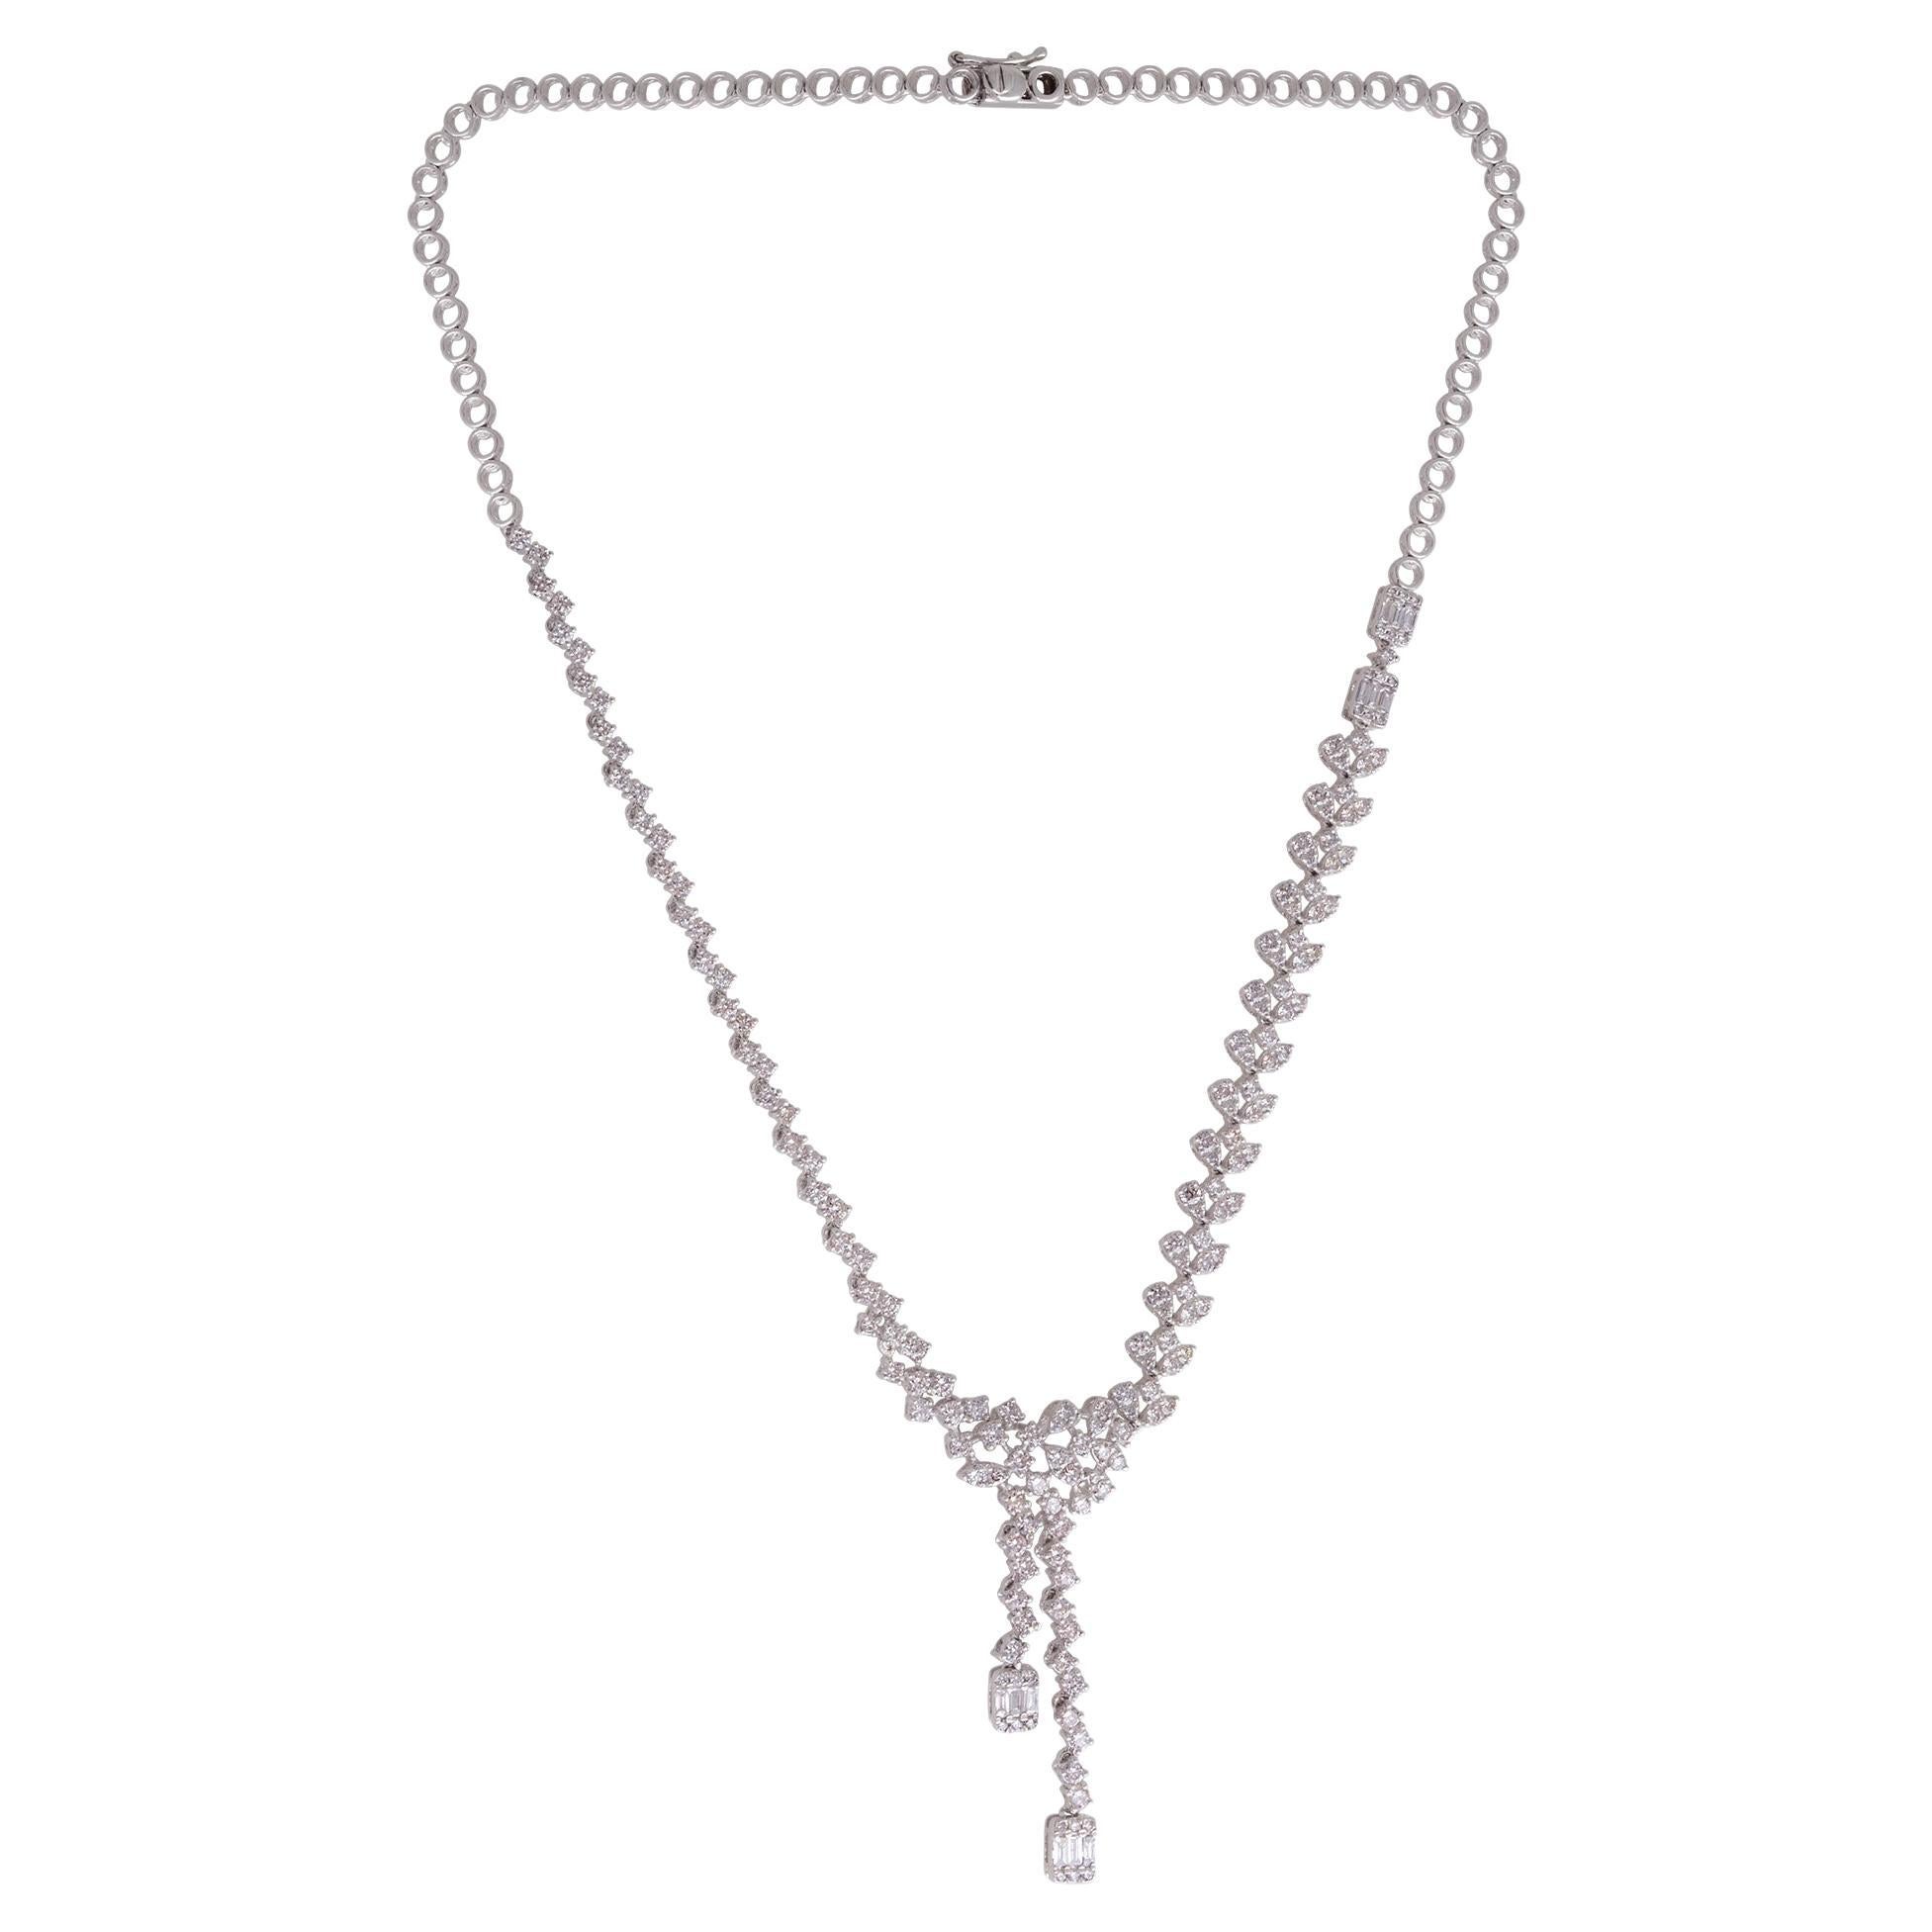 Natural 5.80 Carat Baguette Diamond Lariat Necklace Solid 14k White Gold Jewelry For Sale